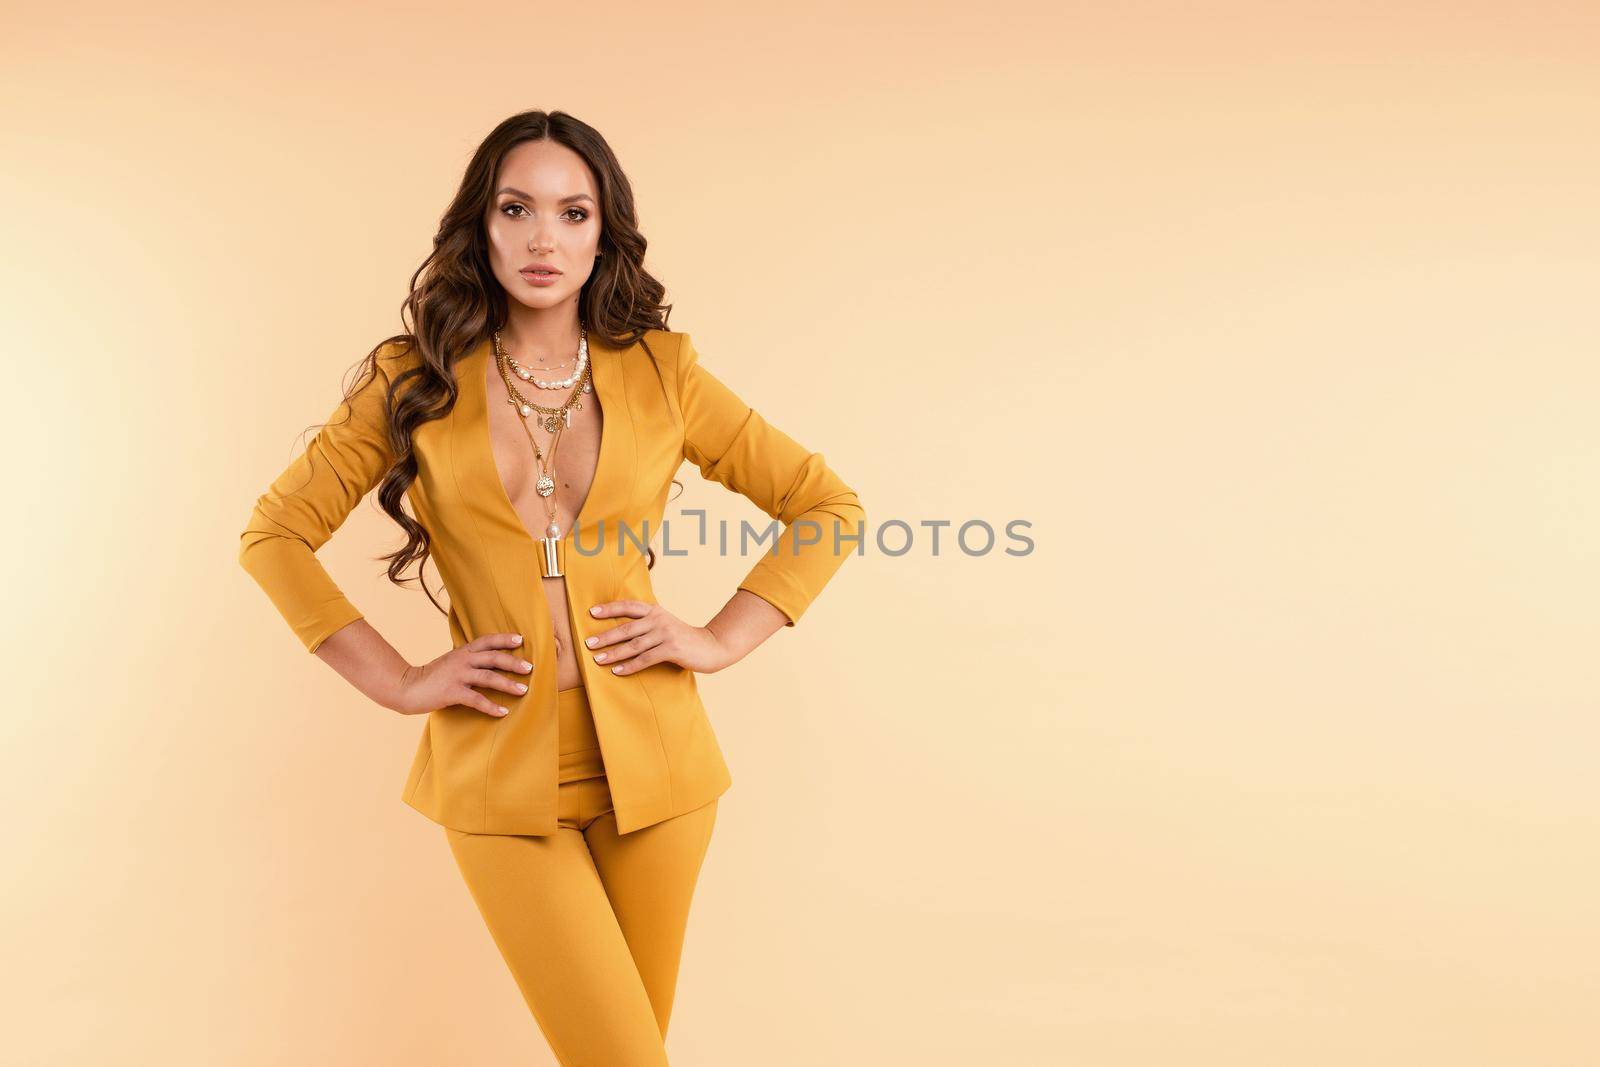 Gorgeous girl with curly hair standing on light studio background. Beautiful brunette lady in yellow elegant costume looking seriously at camera. Professional model holding hand on waist and posing.